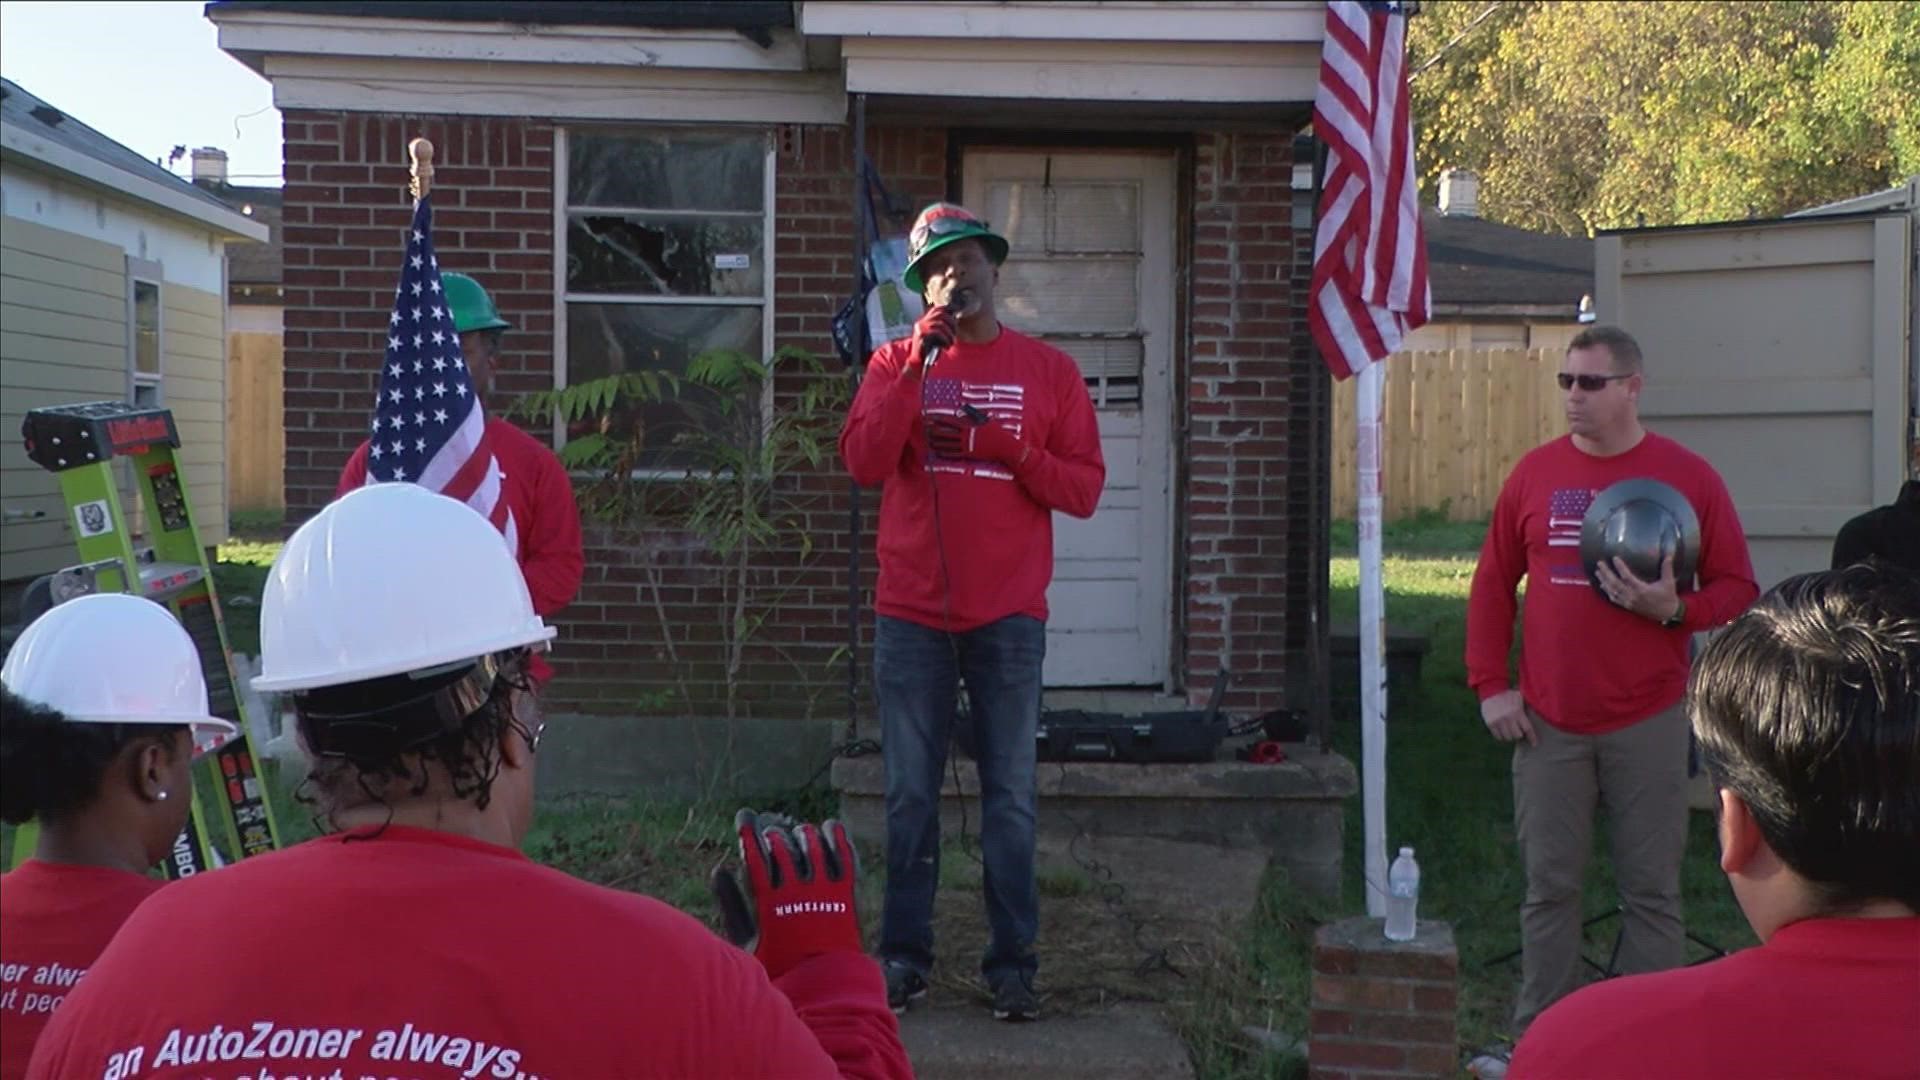 During a Veteran's Day event, the president and CEO of Habitat for Humanity of Greater Memphis reminded the public that they too can volunteer at MemphisHabitat.com.